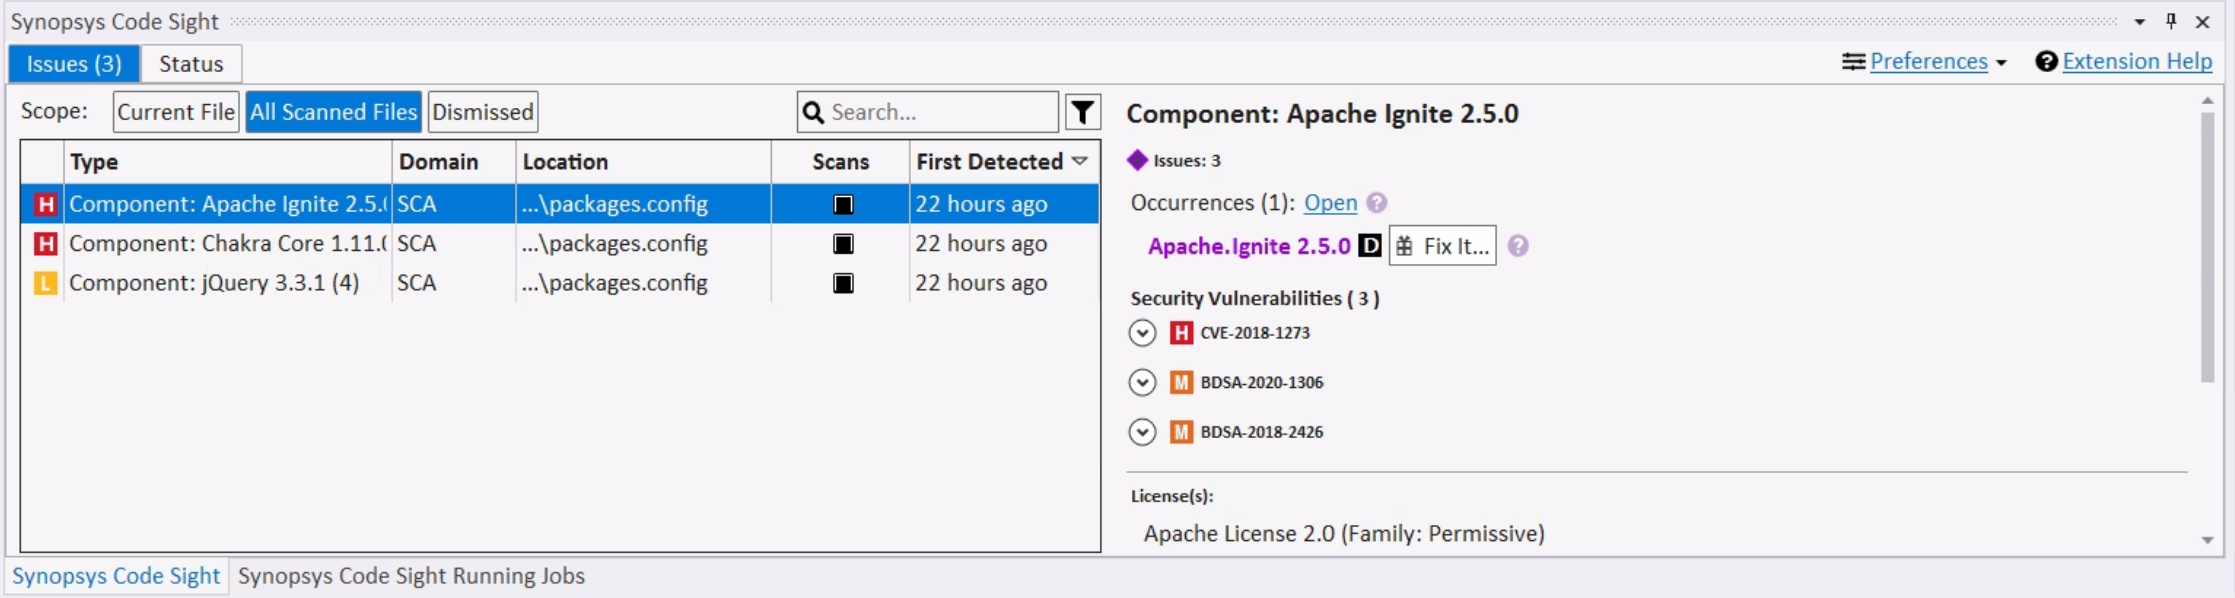 Visual Studio: Remediation with the NuGet package manager